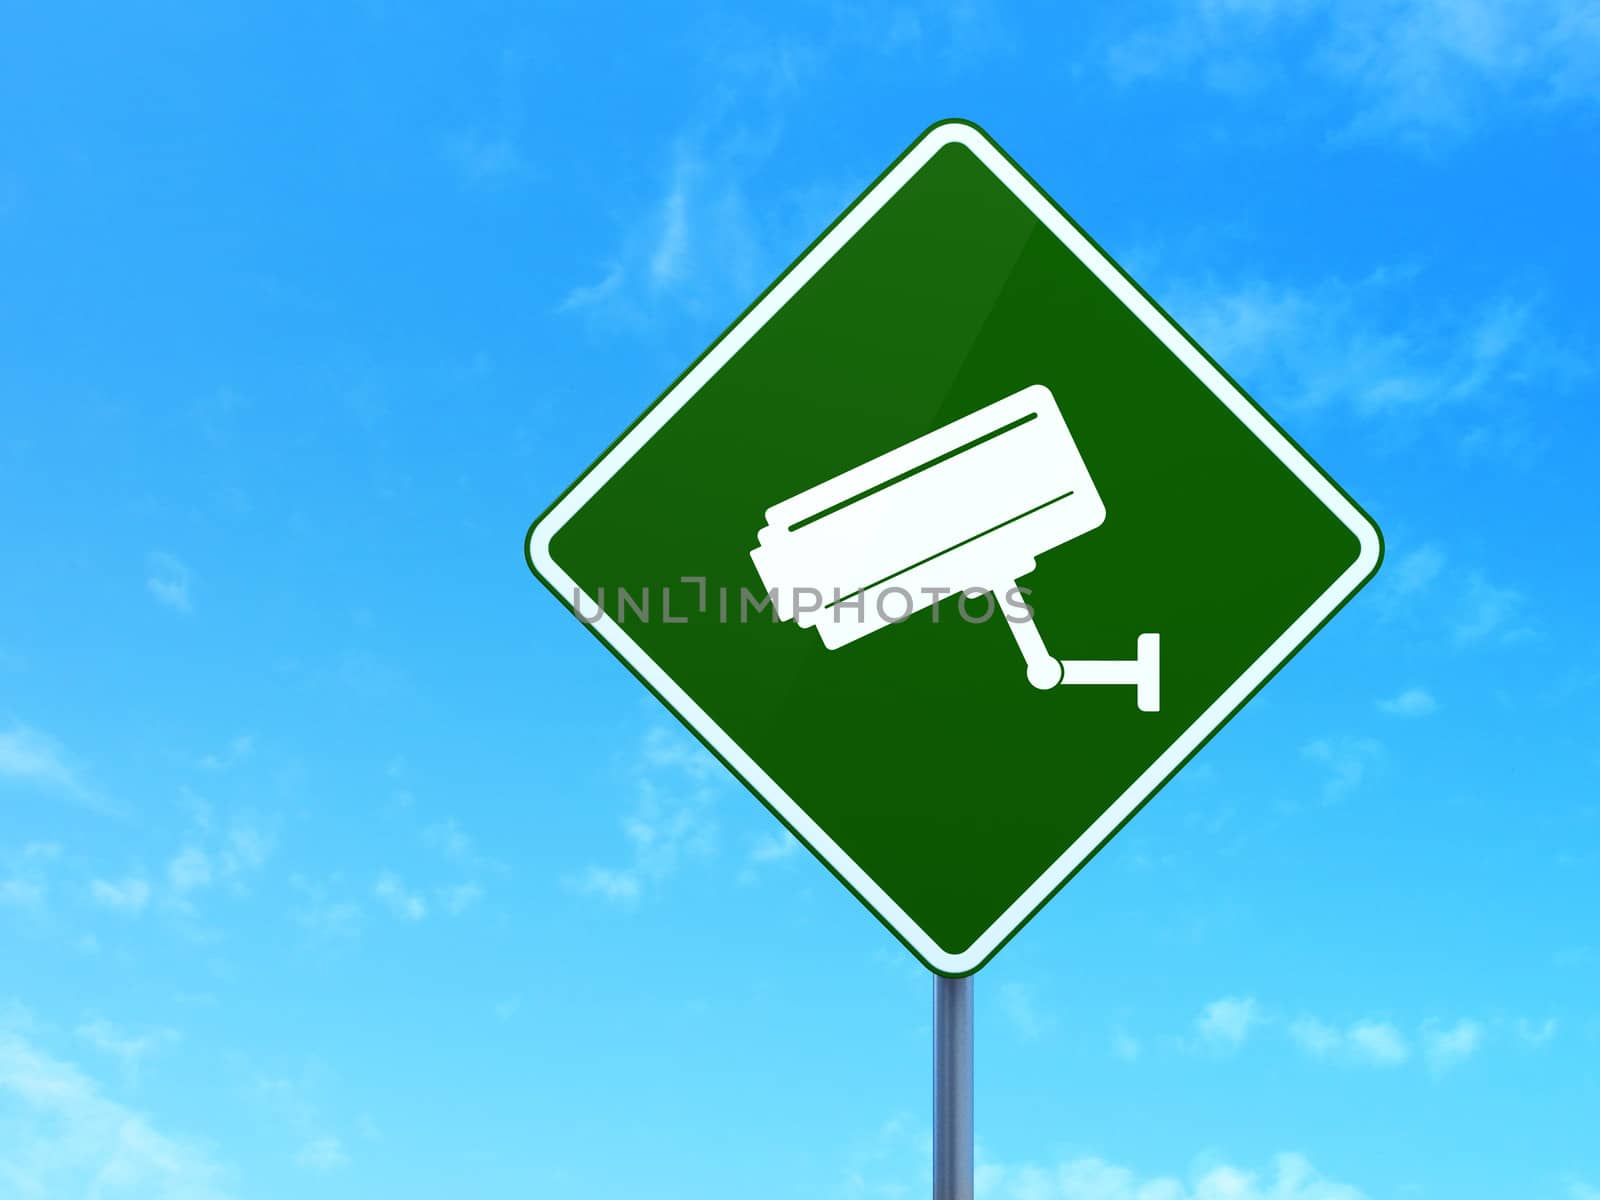 Security concept: Cctv Camera on road sign background by maxkabakov